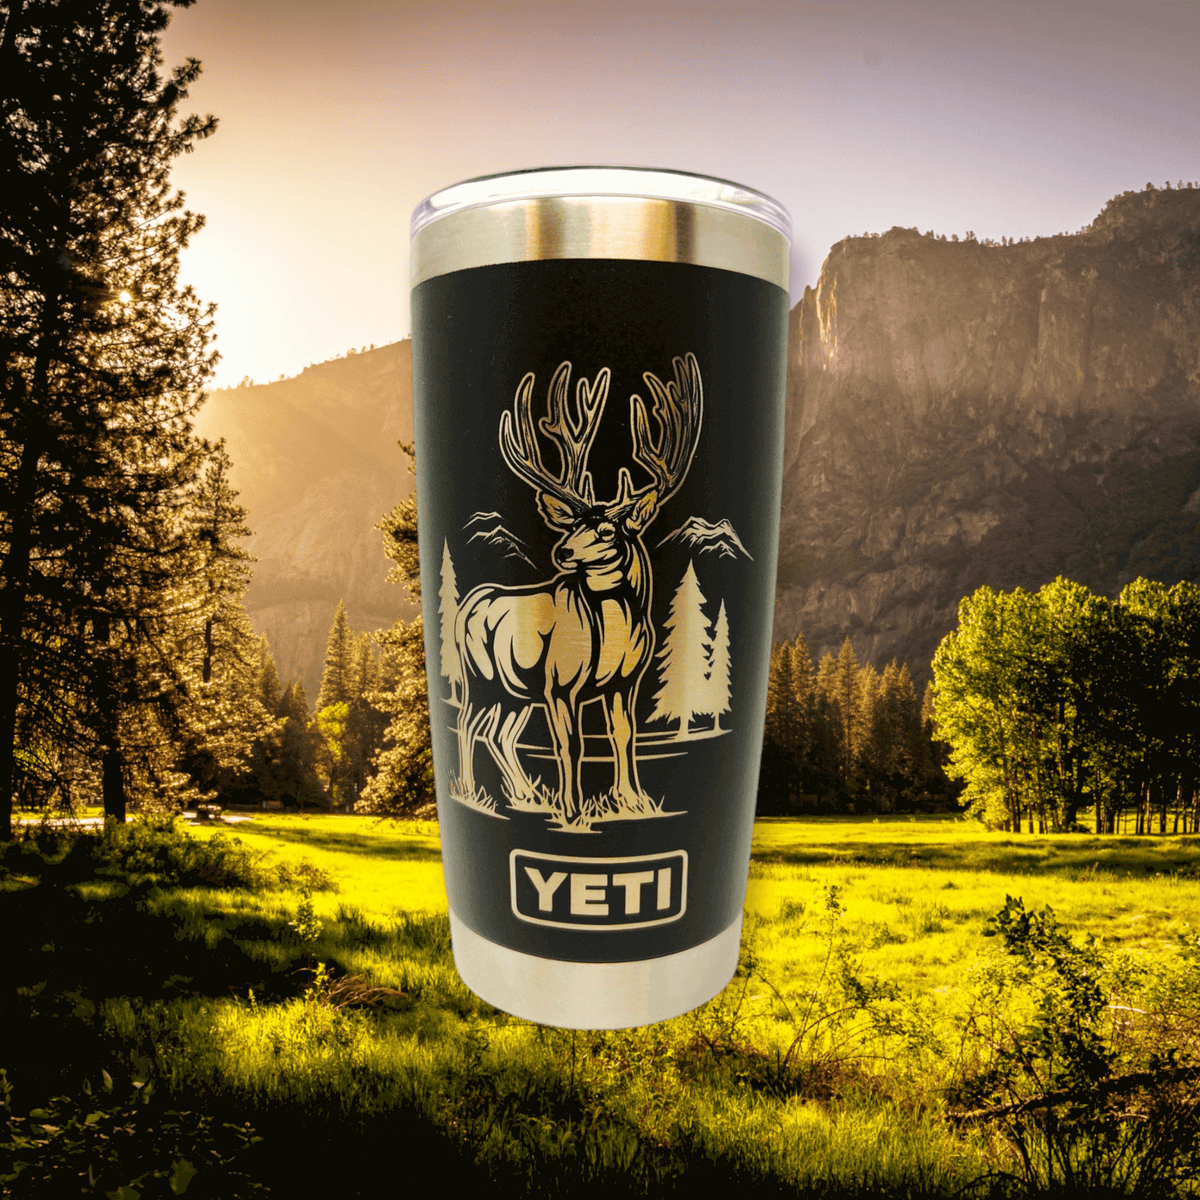 https://cdn.shopify.com/s/files/1/0606/5497/7184/products/wind-river_outpost_mule_deer-yeti-mountain-background_1200x.png?v=1690330700